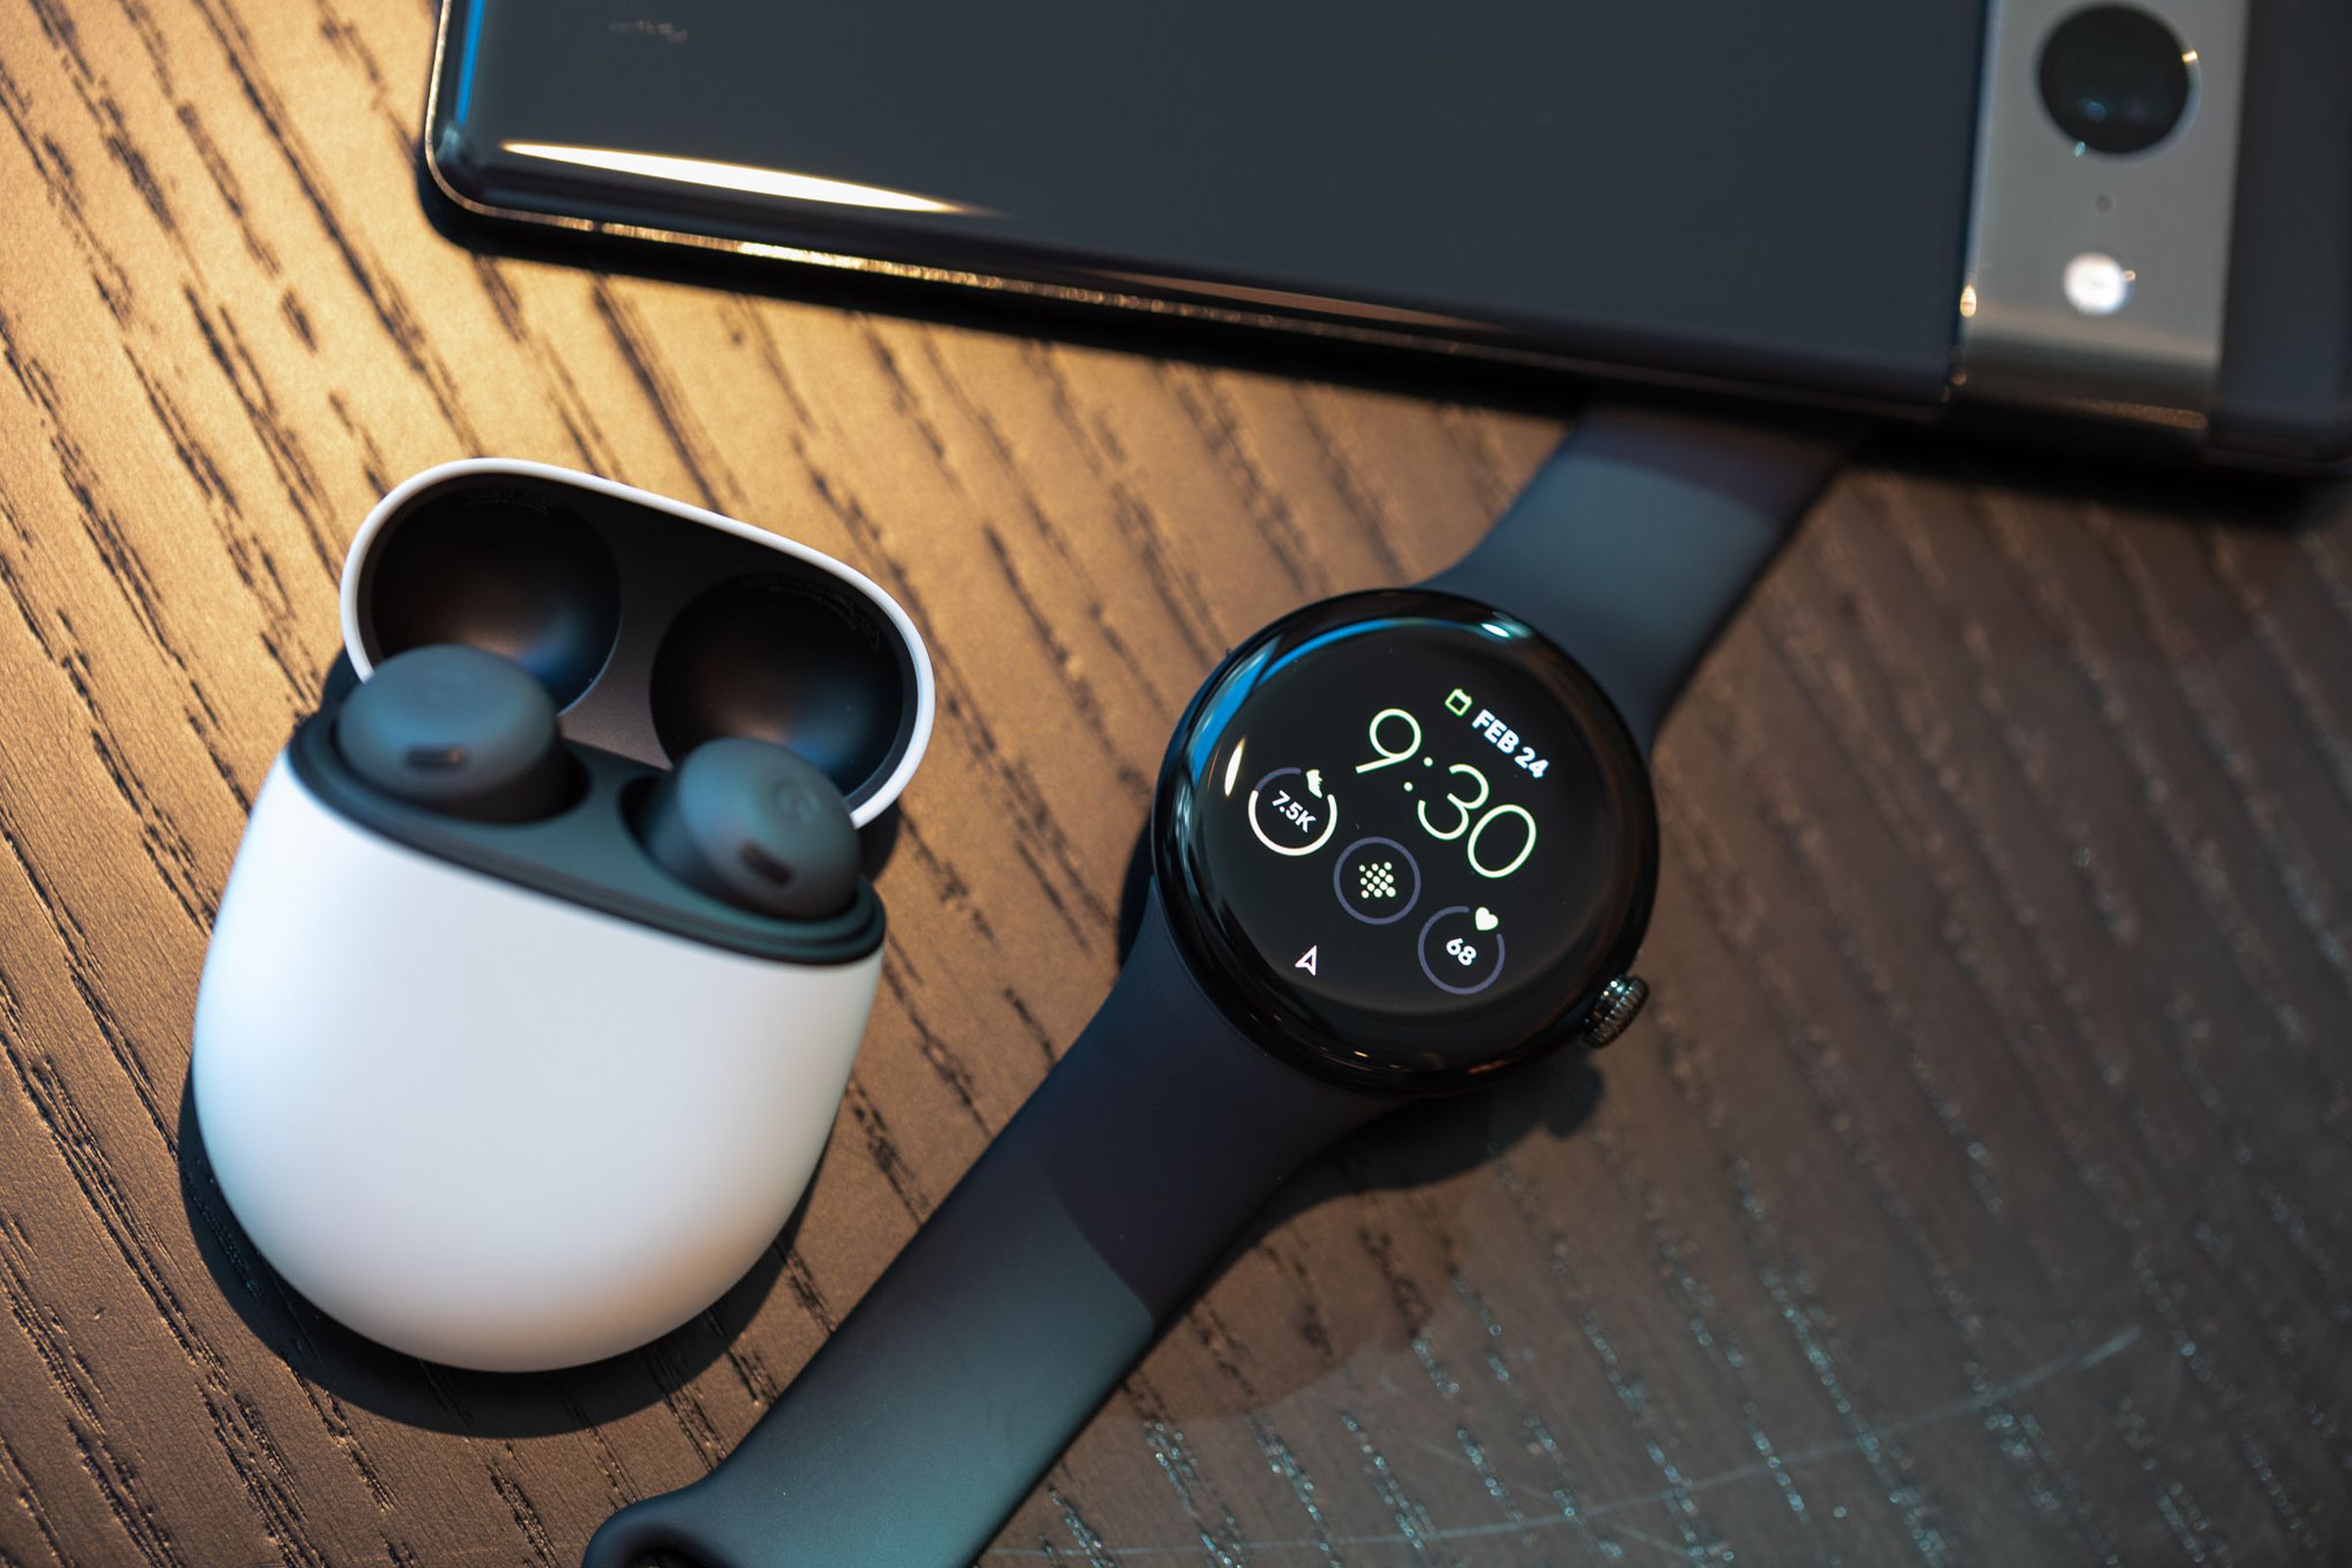 The Pixel Watch next to the Pixel Buds in their case and a Pixel 7 phone.